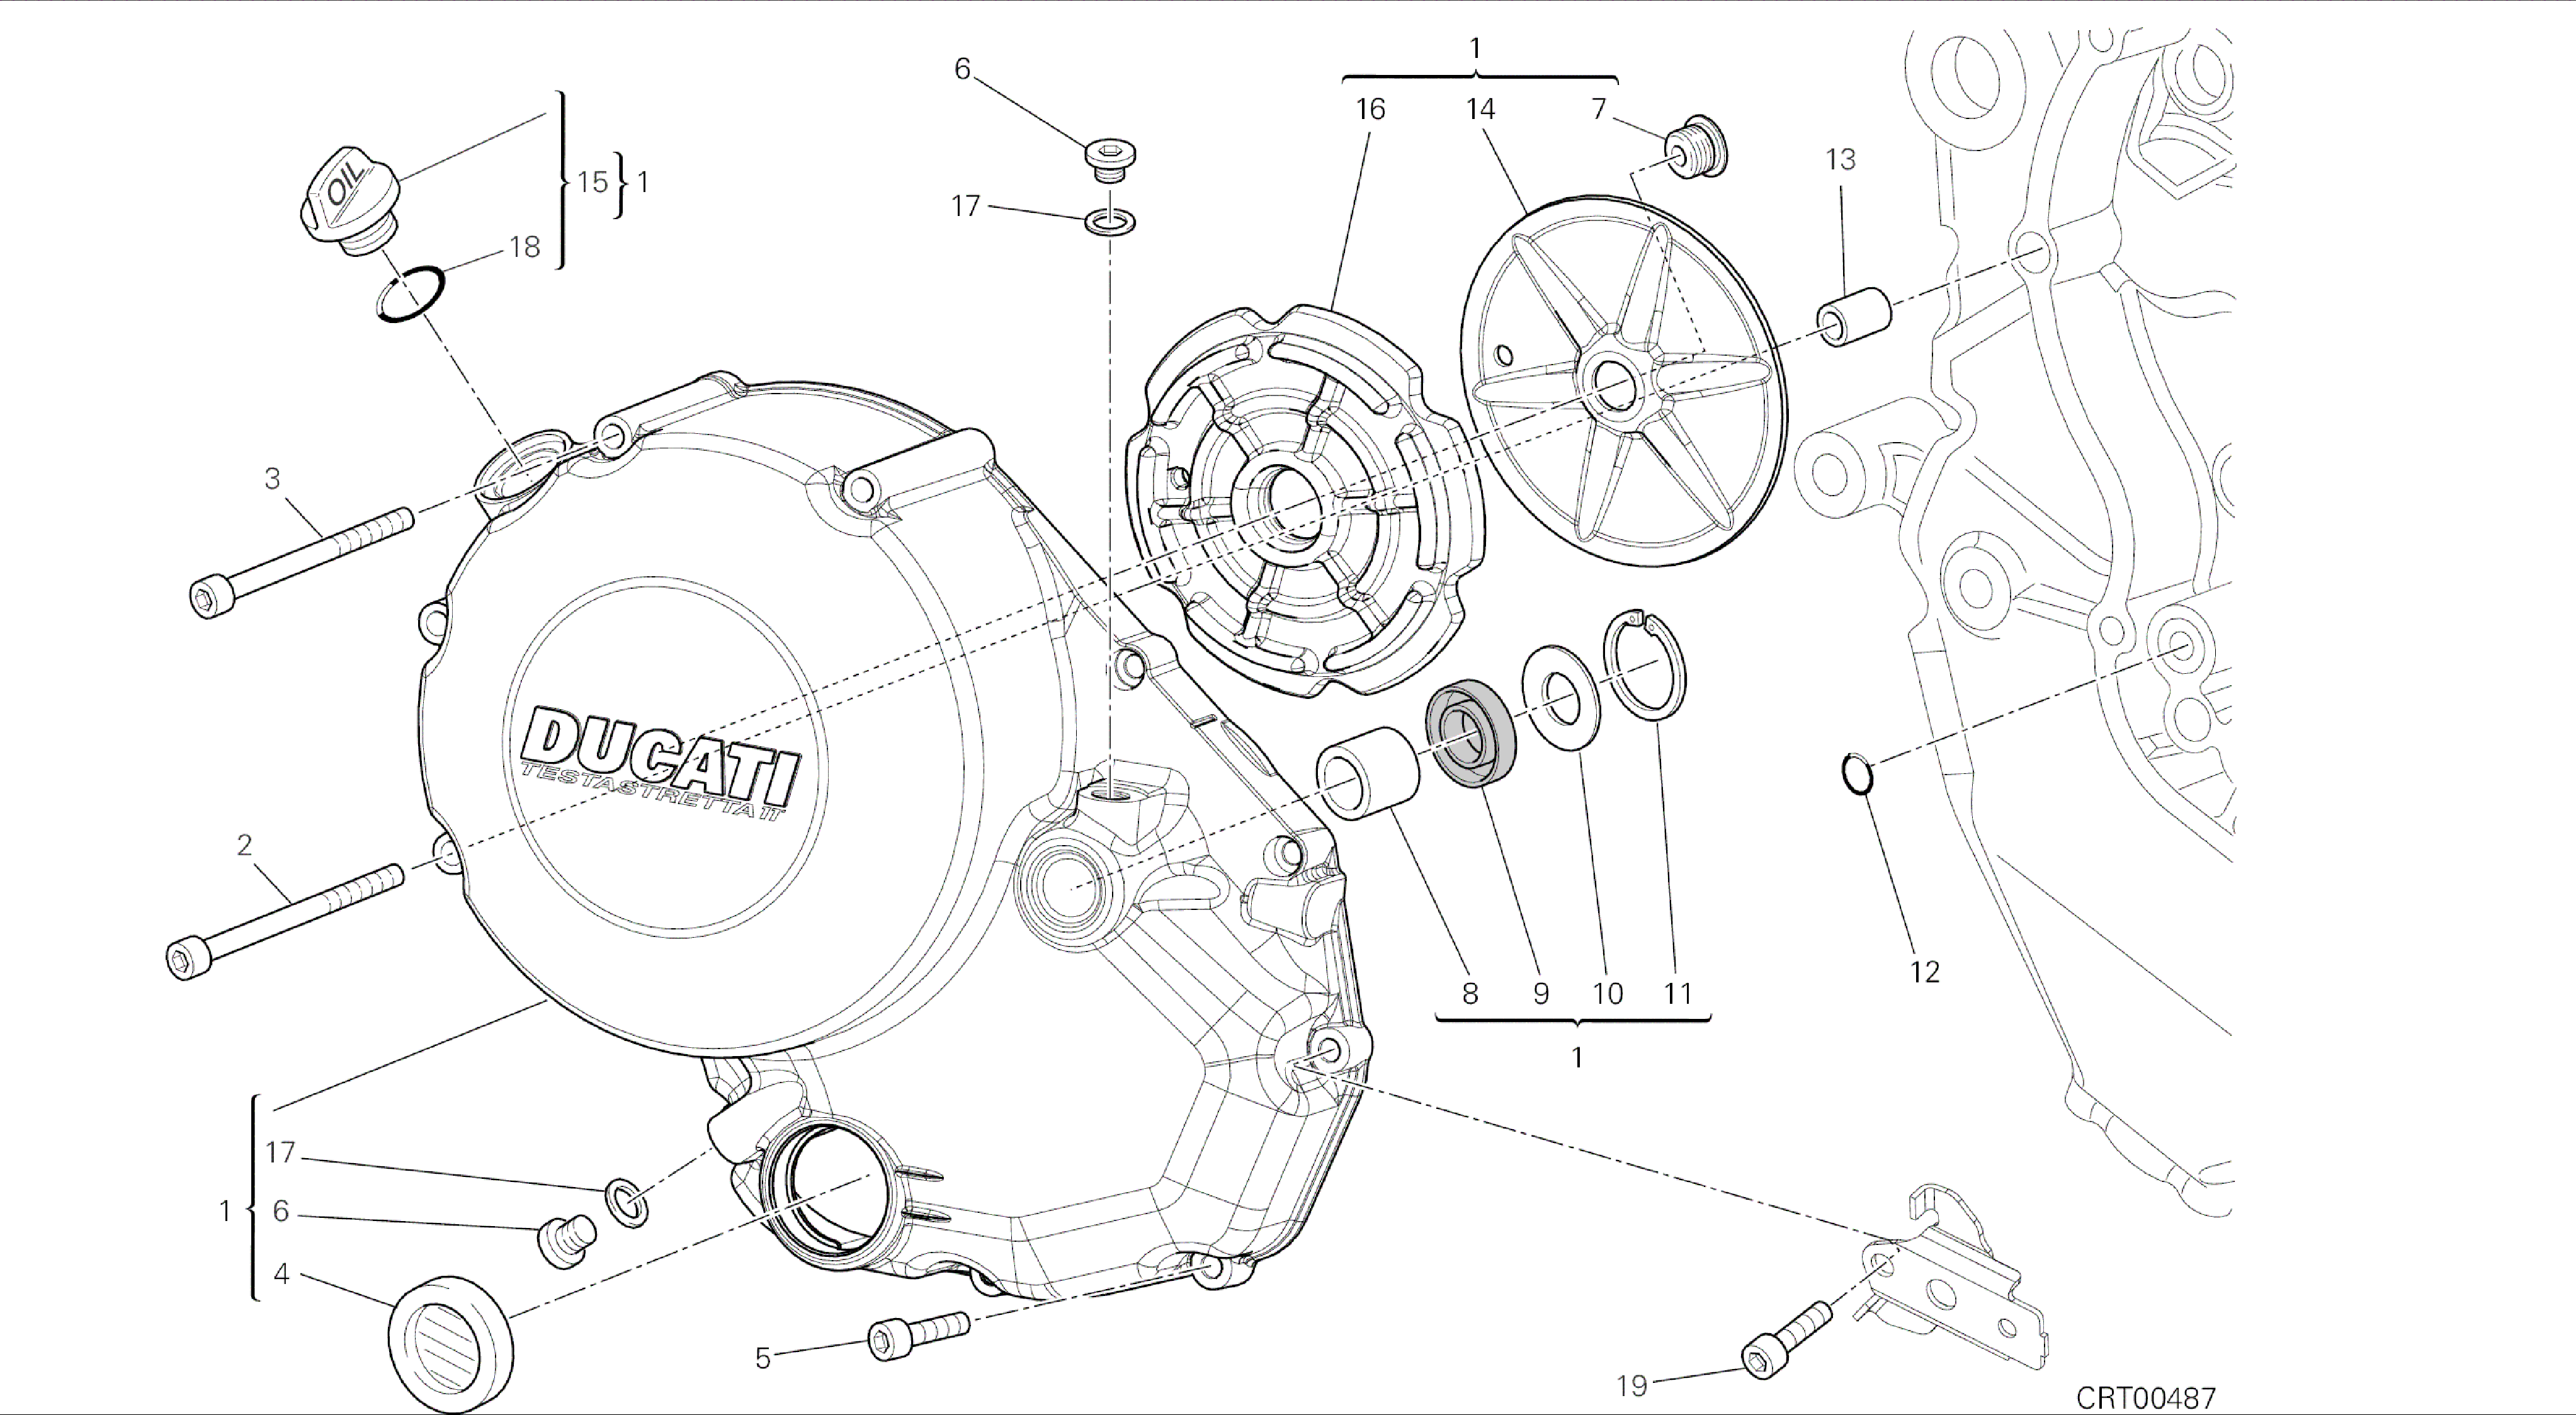 DRAWING 005 - CLUTCH COVER [MOD:MS1200-A;XST:AUS,EUR,FRA,THA]GROUP ENGINE